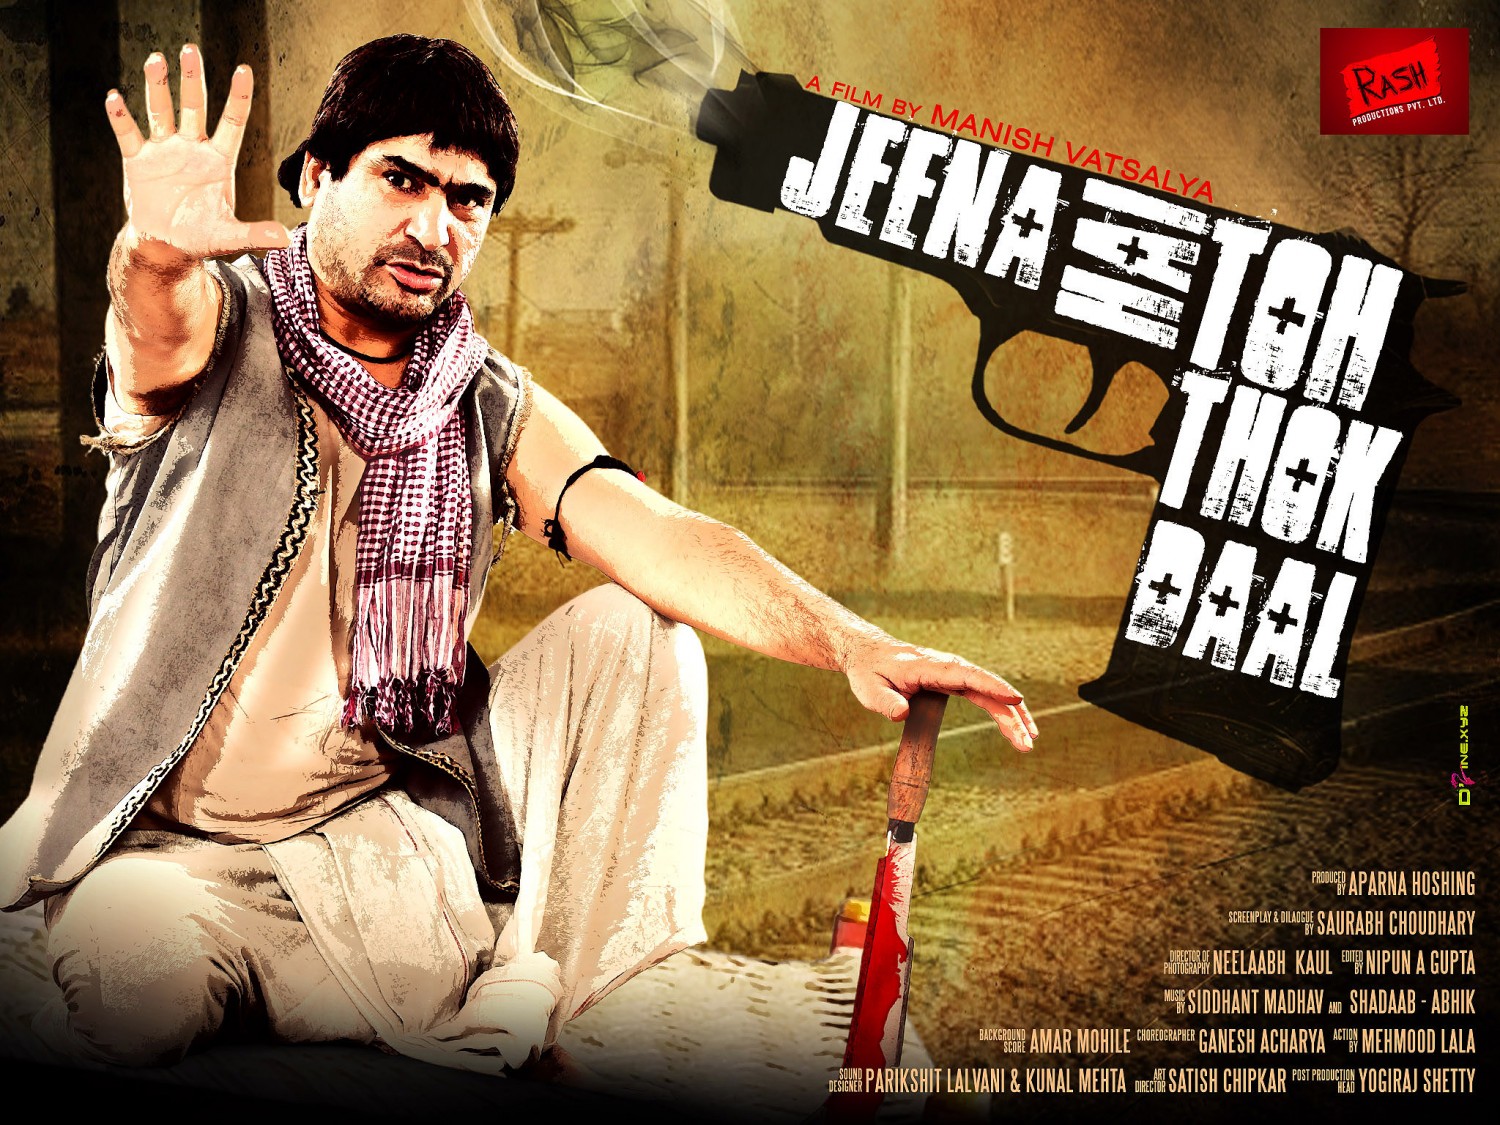 Extra Large Movie Poster Image for Jeena Hai Toh Thok Daal (#12 of 12)